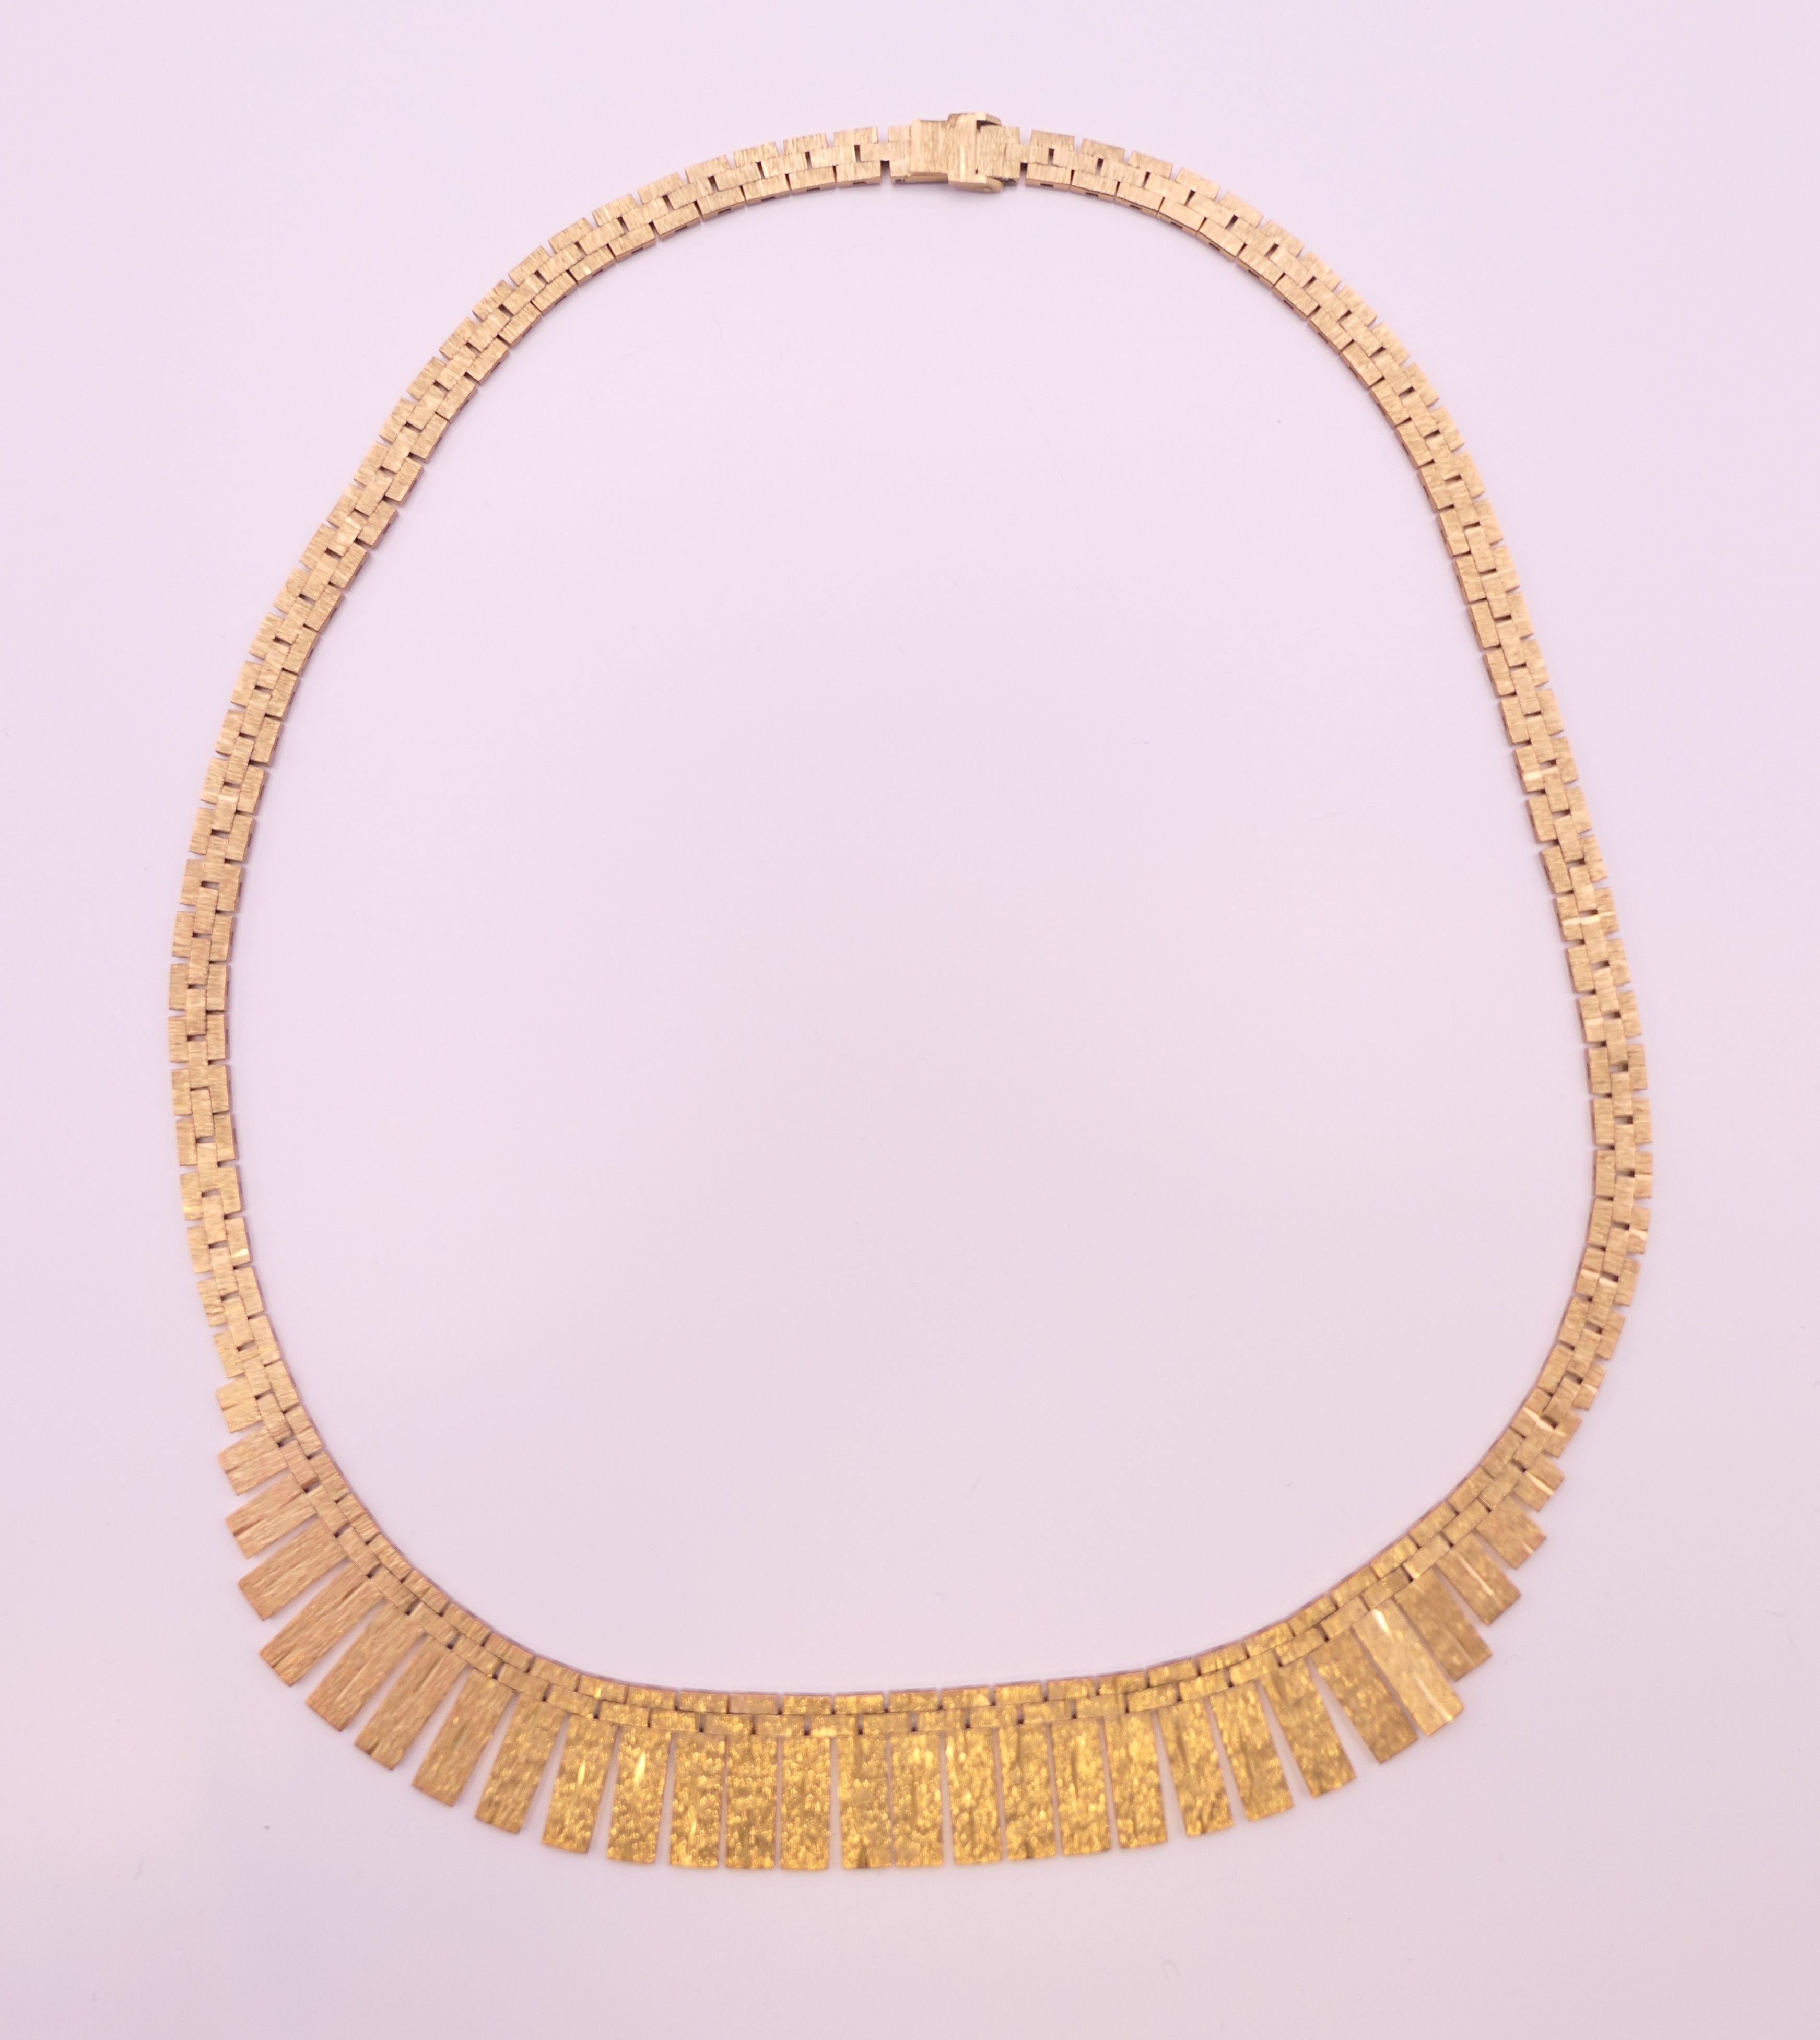 A 9 ct gold necklace. 42 cm long. 33.6 grammes. - Image 2 of 8